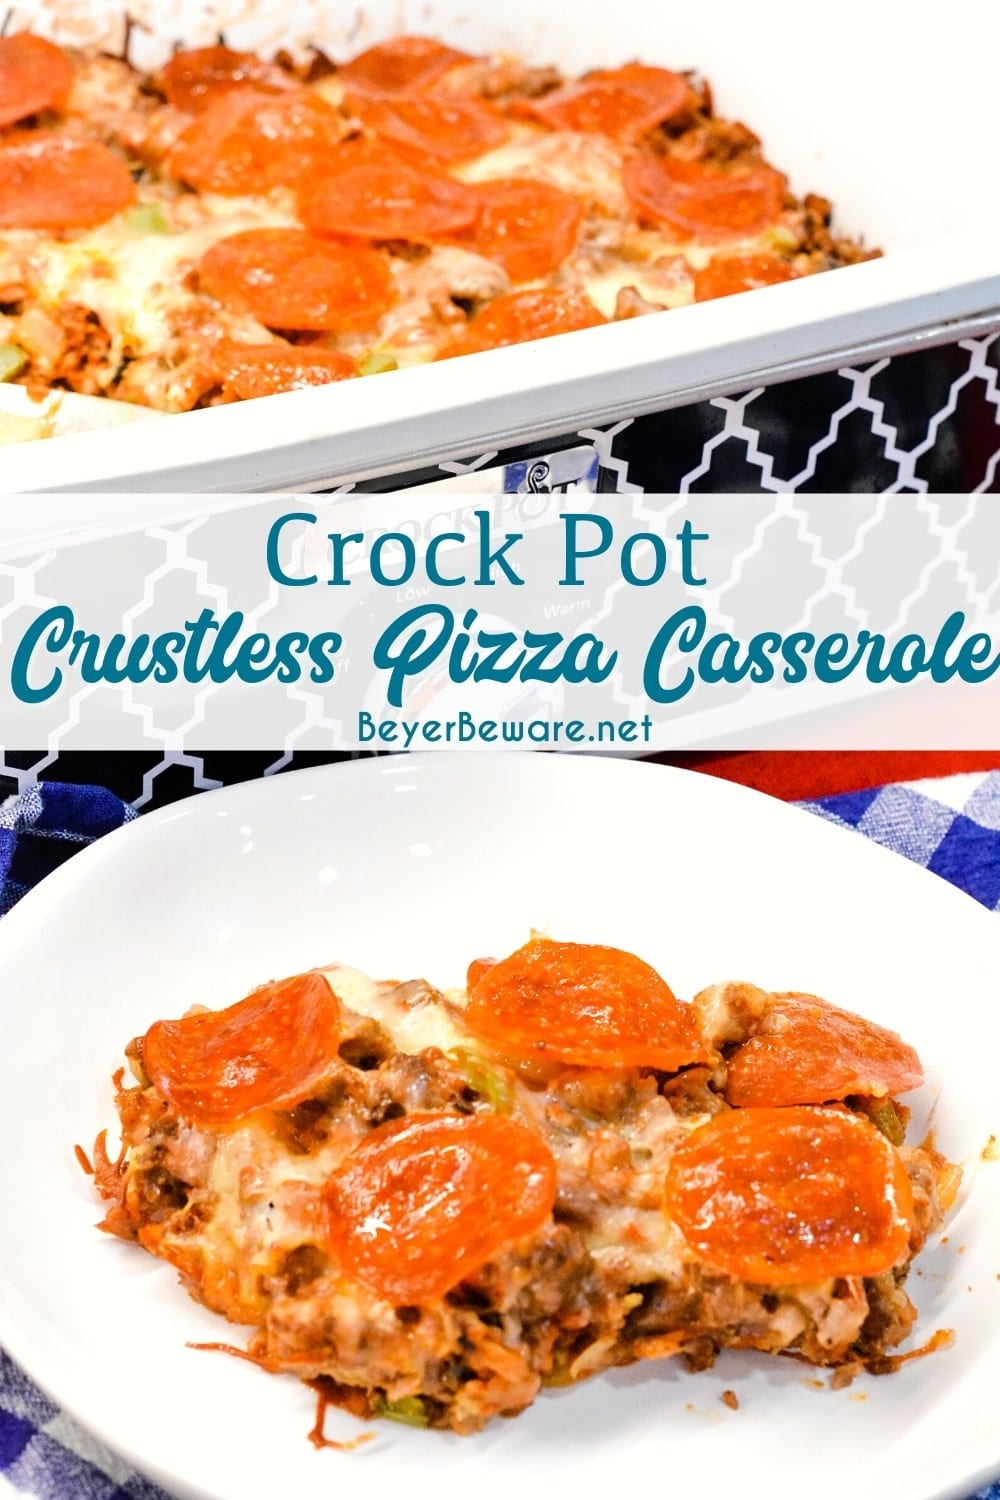 This low carb crock pot pizza casserole is a new favorite pizza recipe even for the folks not eating low-carb since it is full of a lot of meat, cheese, and flavor no one misses the crust or pasta in this crustless pizza casserole.